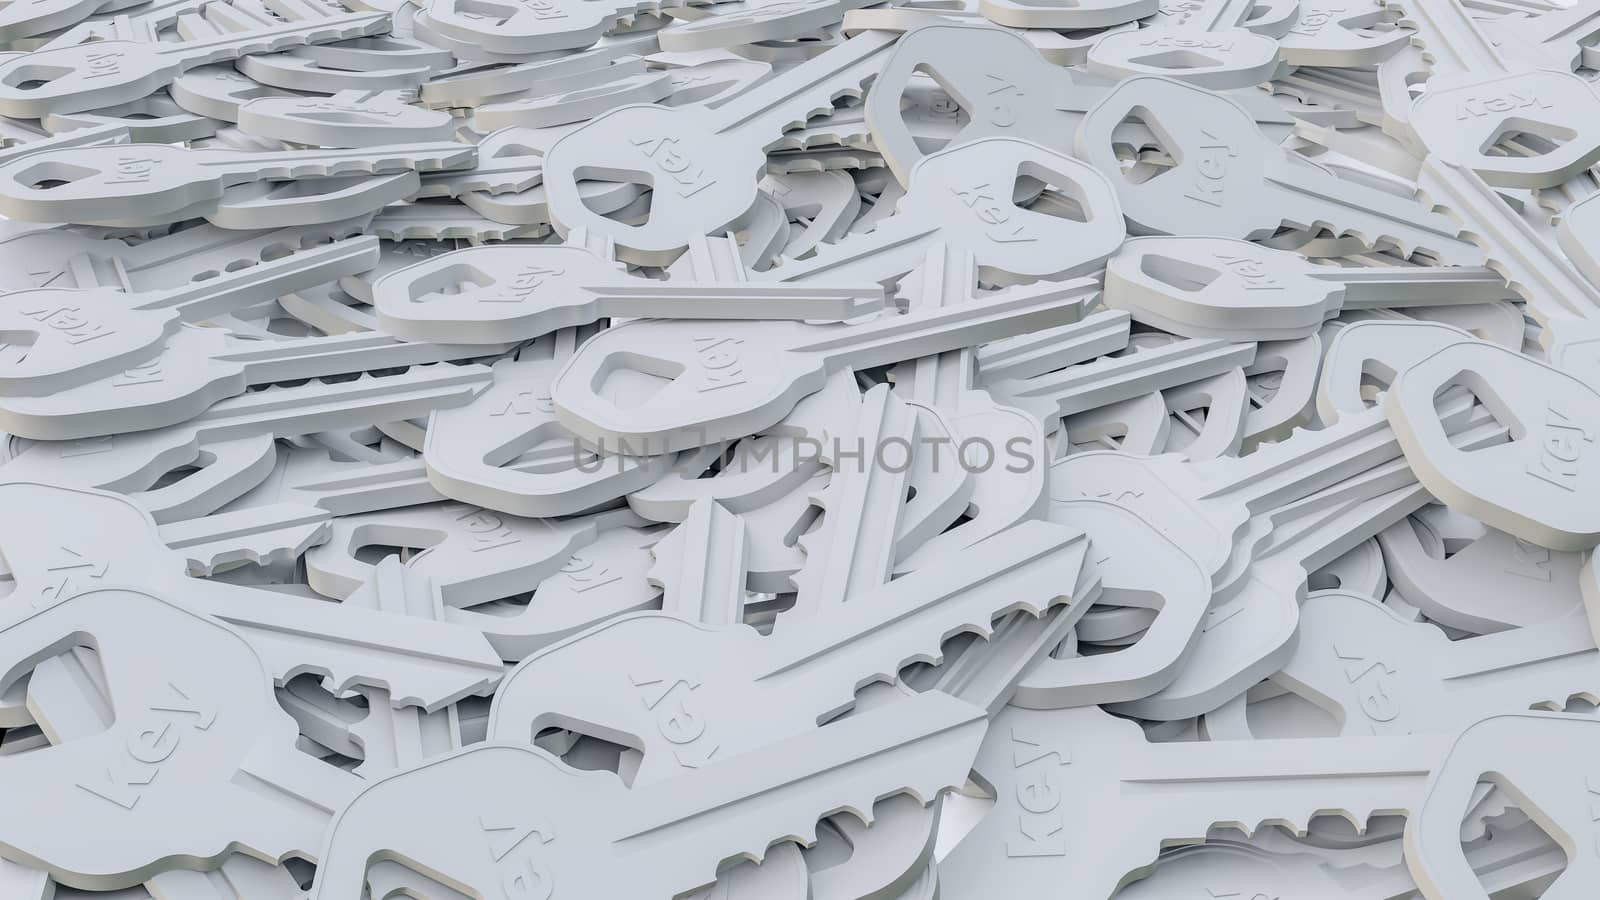 Abstract background of white keys. 3d illustration